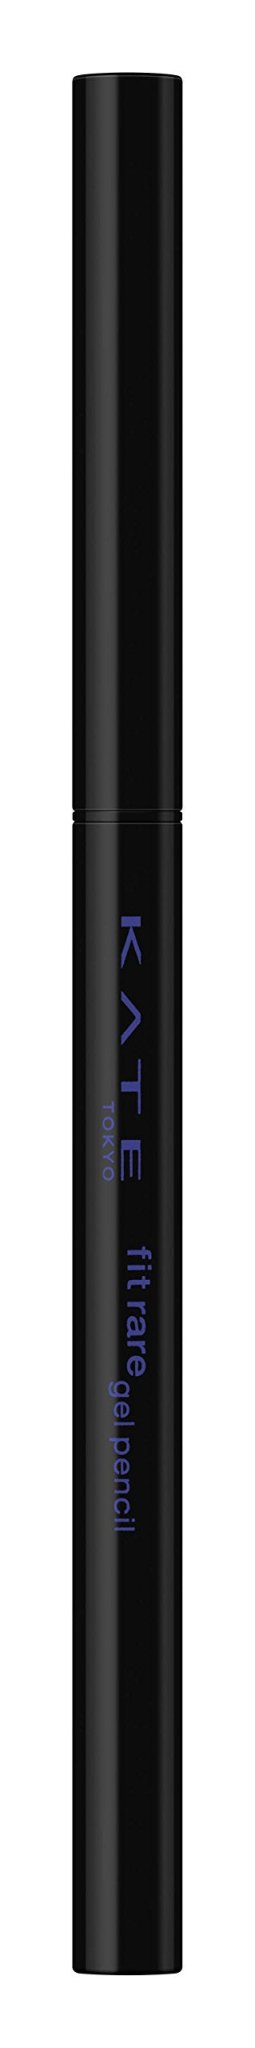 Kate Rare Fit Bu - 1 Gel Pencil in Bitter Blue - High - Quality Kate Product